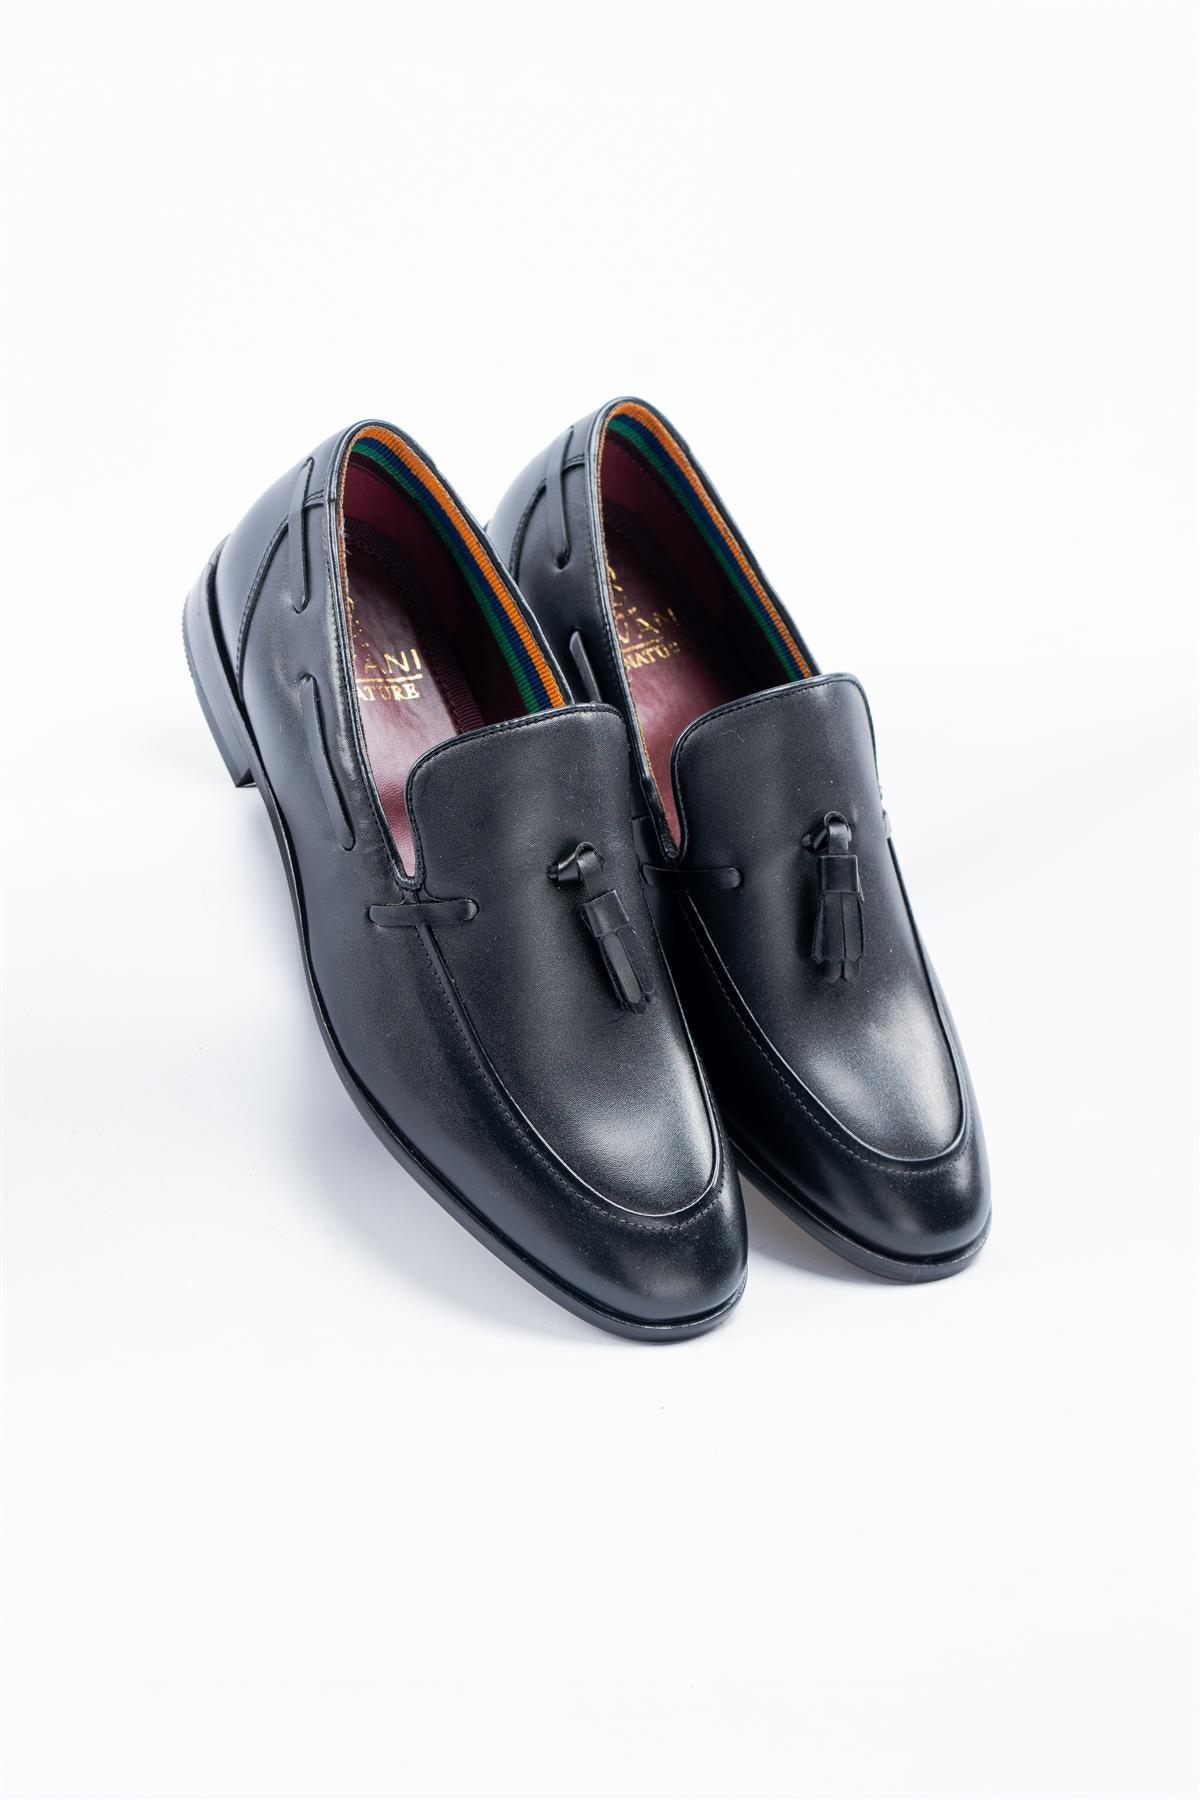 Freemont black loafers front